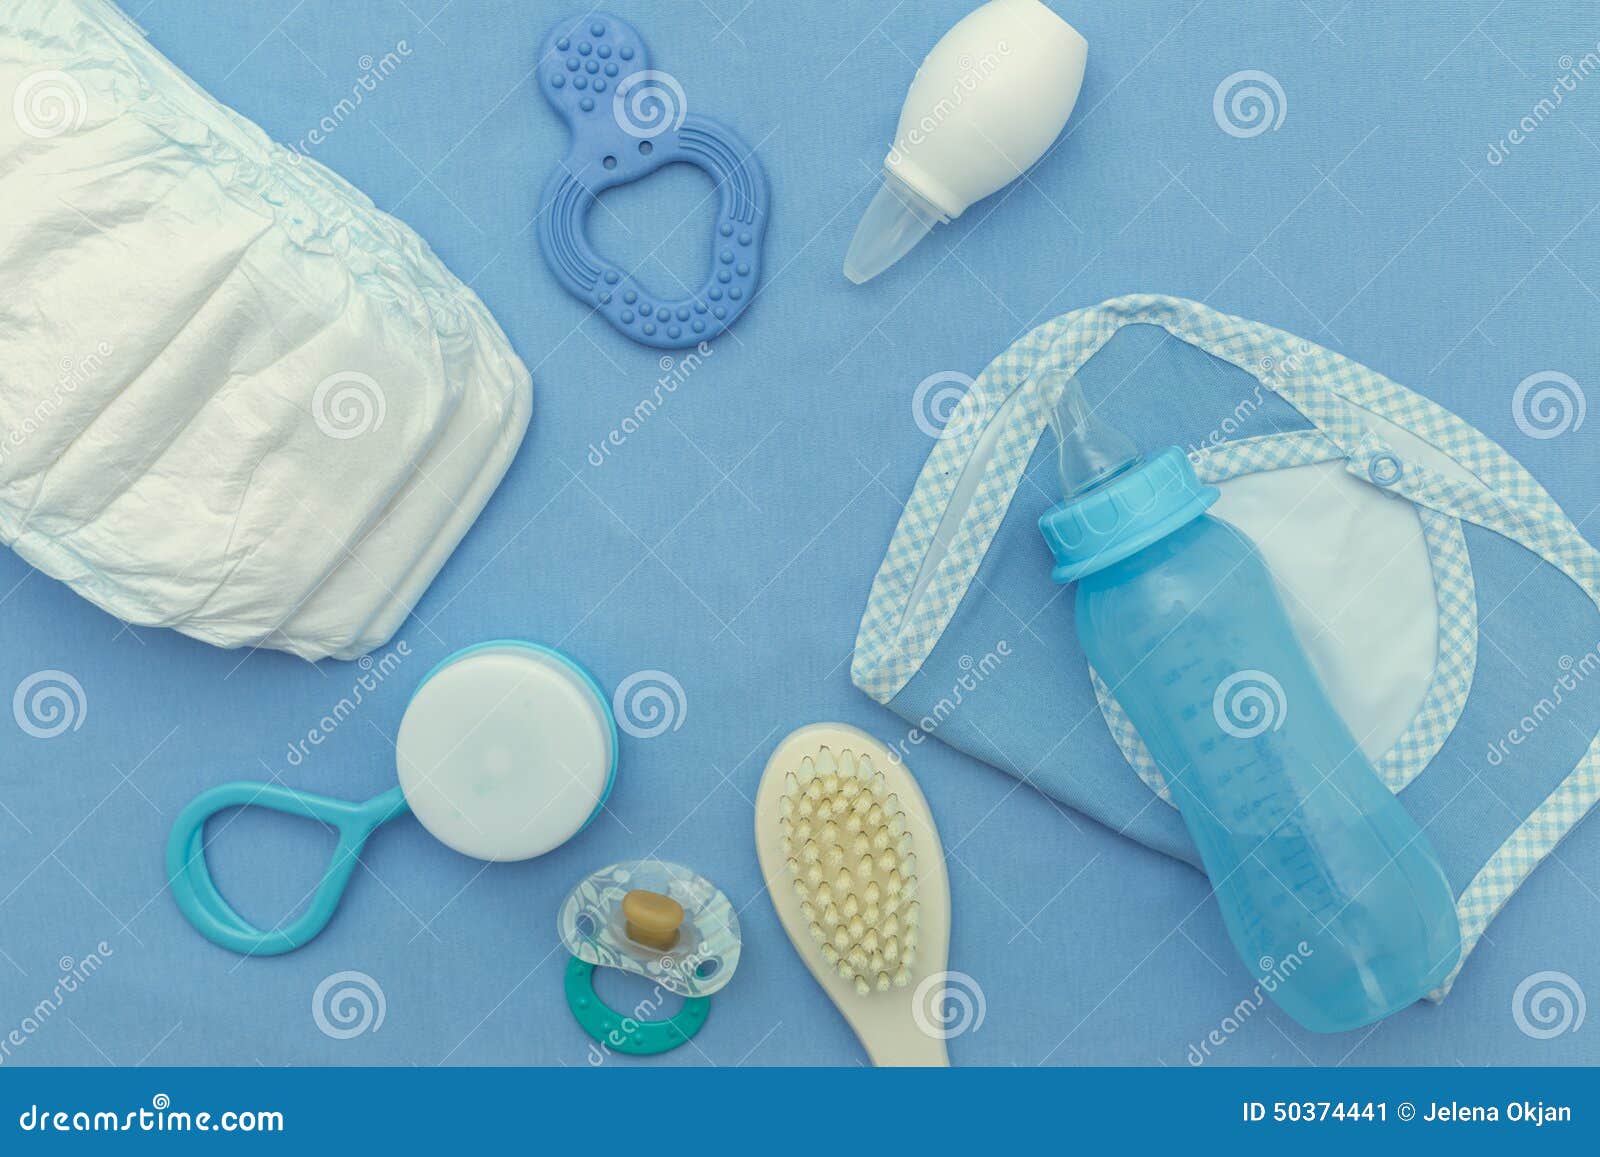 Baby accessories stock image. Image of disposable, baby - 50374441